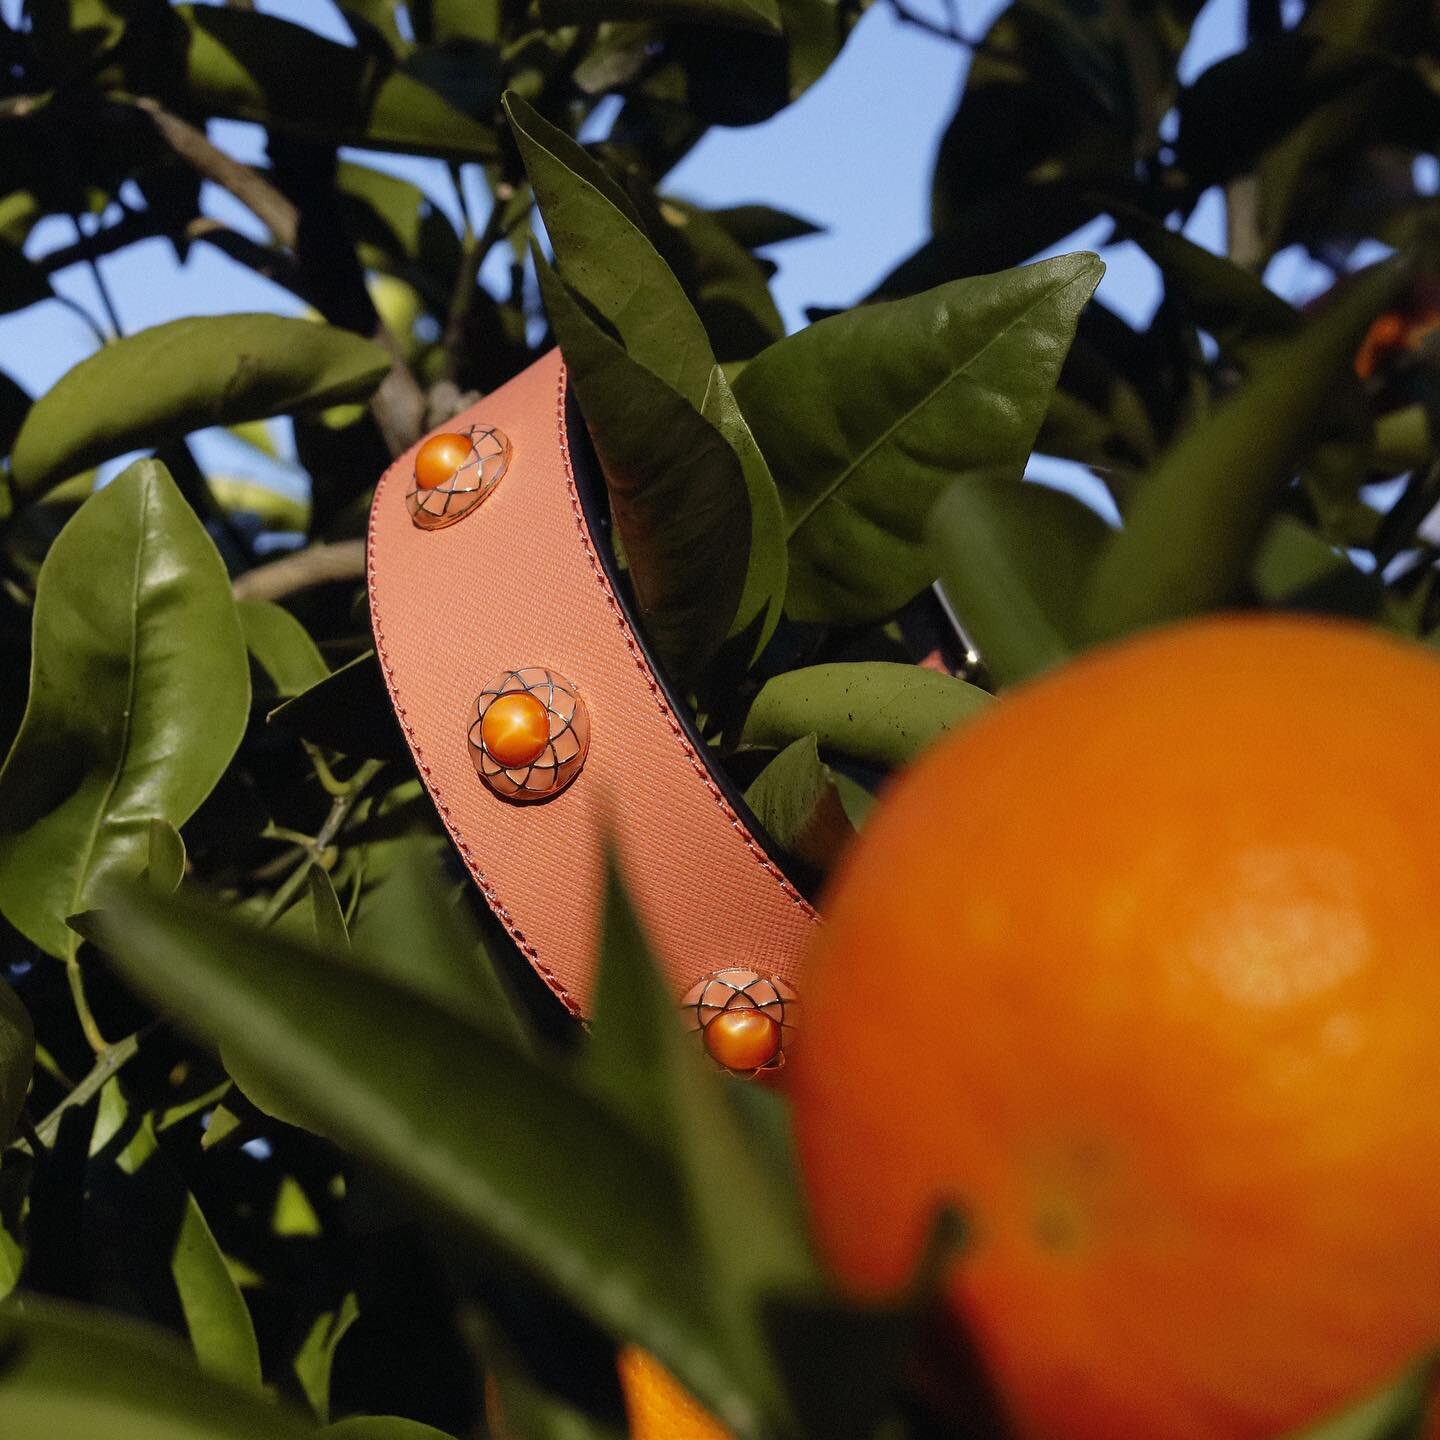 Until collars really do start growing on trees, we&rsquo;ve got you covered.
Shop heavenly pet collars now at www.bonboy.co